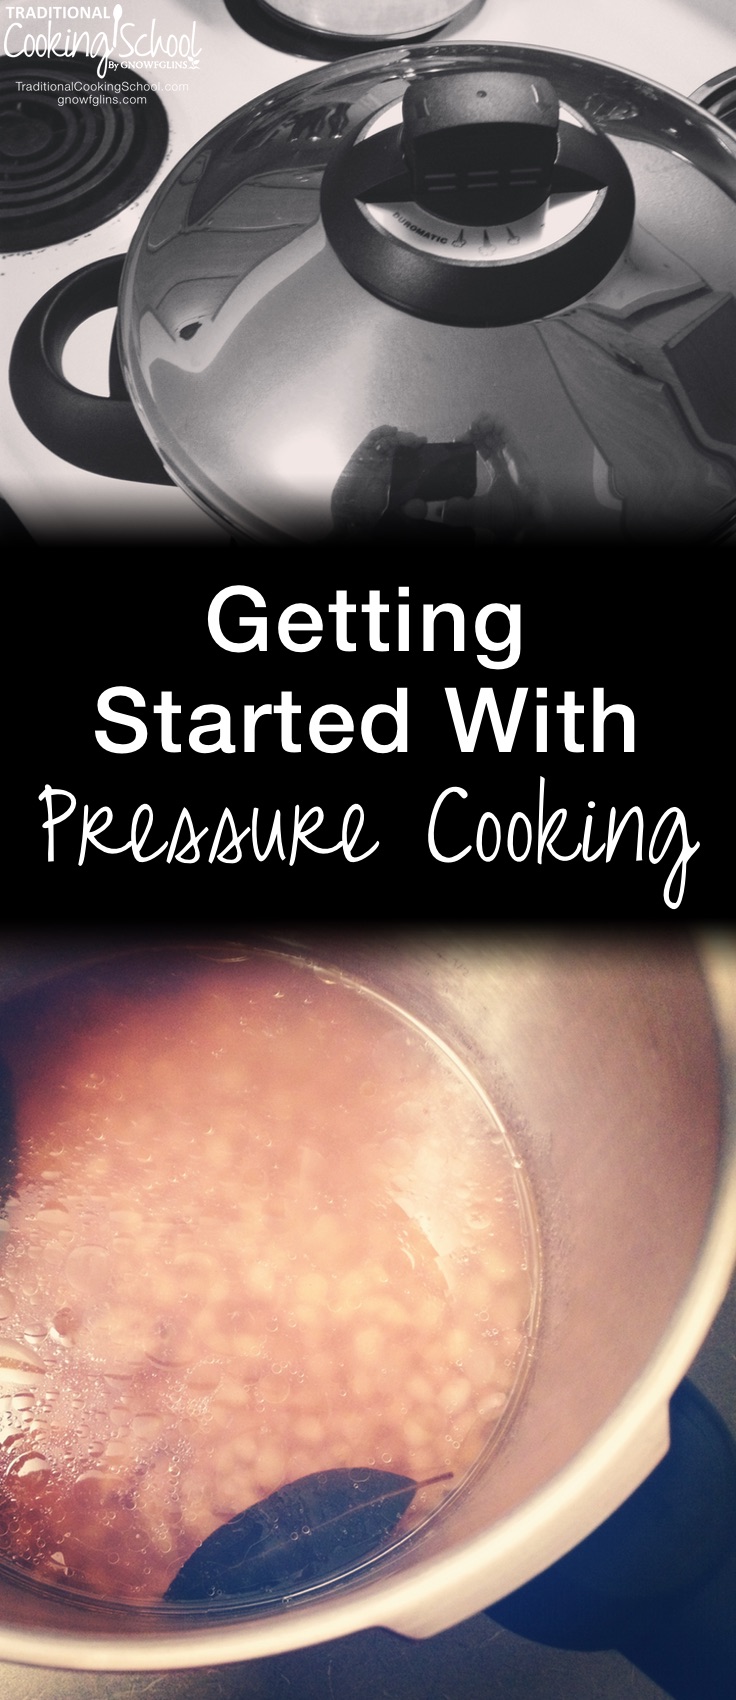 Getting Started with Pressure Cooking | For a long time, I have been against pressure canning and pressure cooking. Pressure canning, at least, is discouraged in Nourishing Traditions as nutrient destroyer. And traditional food lovers seem to follow an unwritten rule that anything cooked or canned under pressure must be suspect. I am not against pressure canning or cooking any more. Today I want to share why I've changed my tune, plus resources so you can get started, too! | TraditionalCookingSchool.com